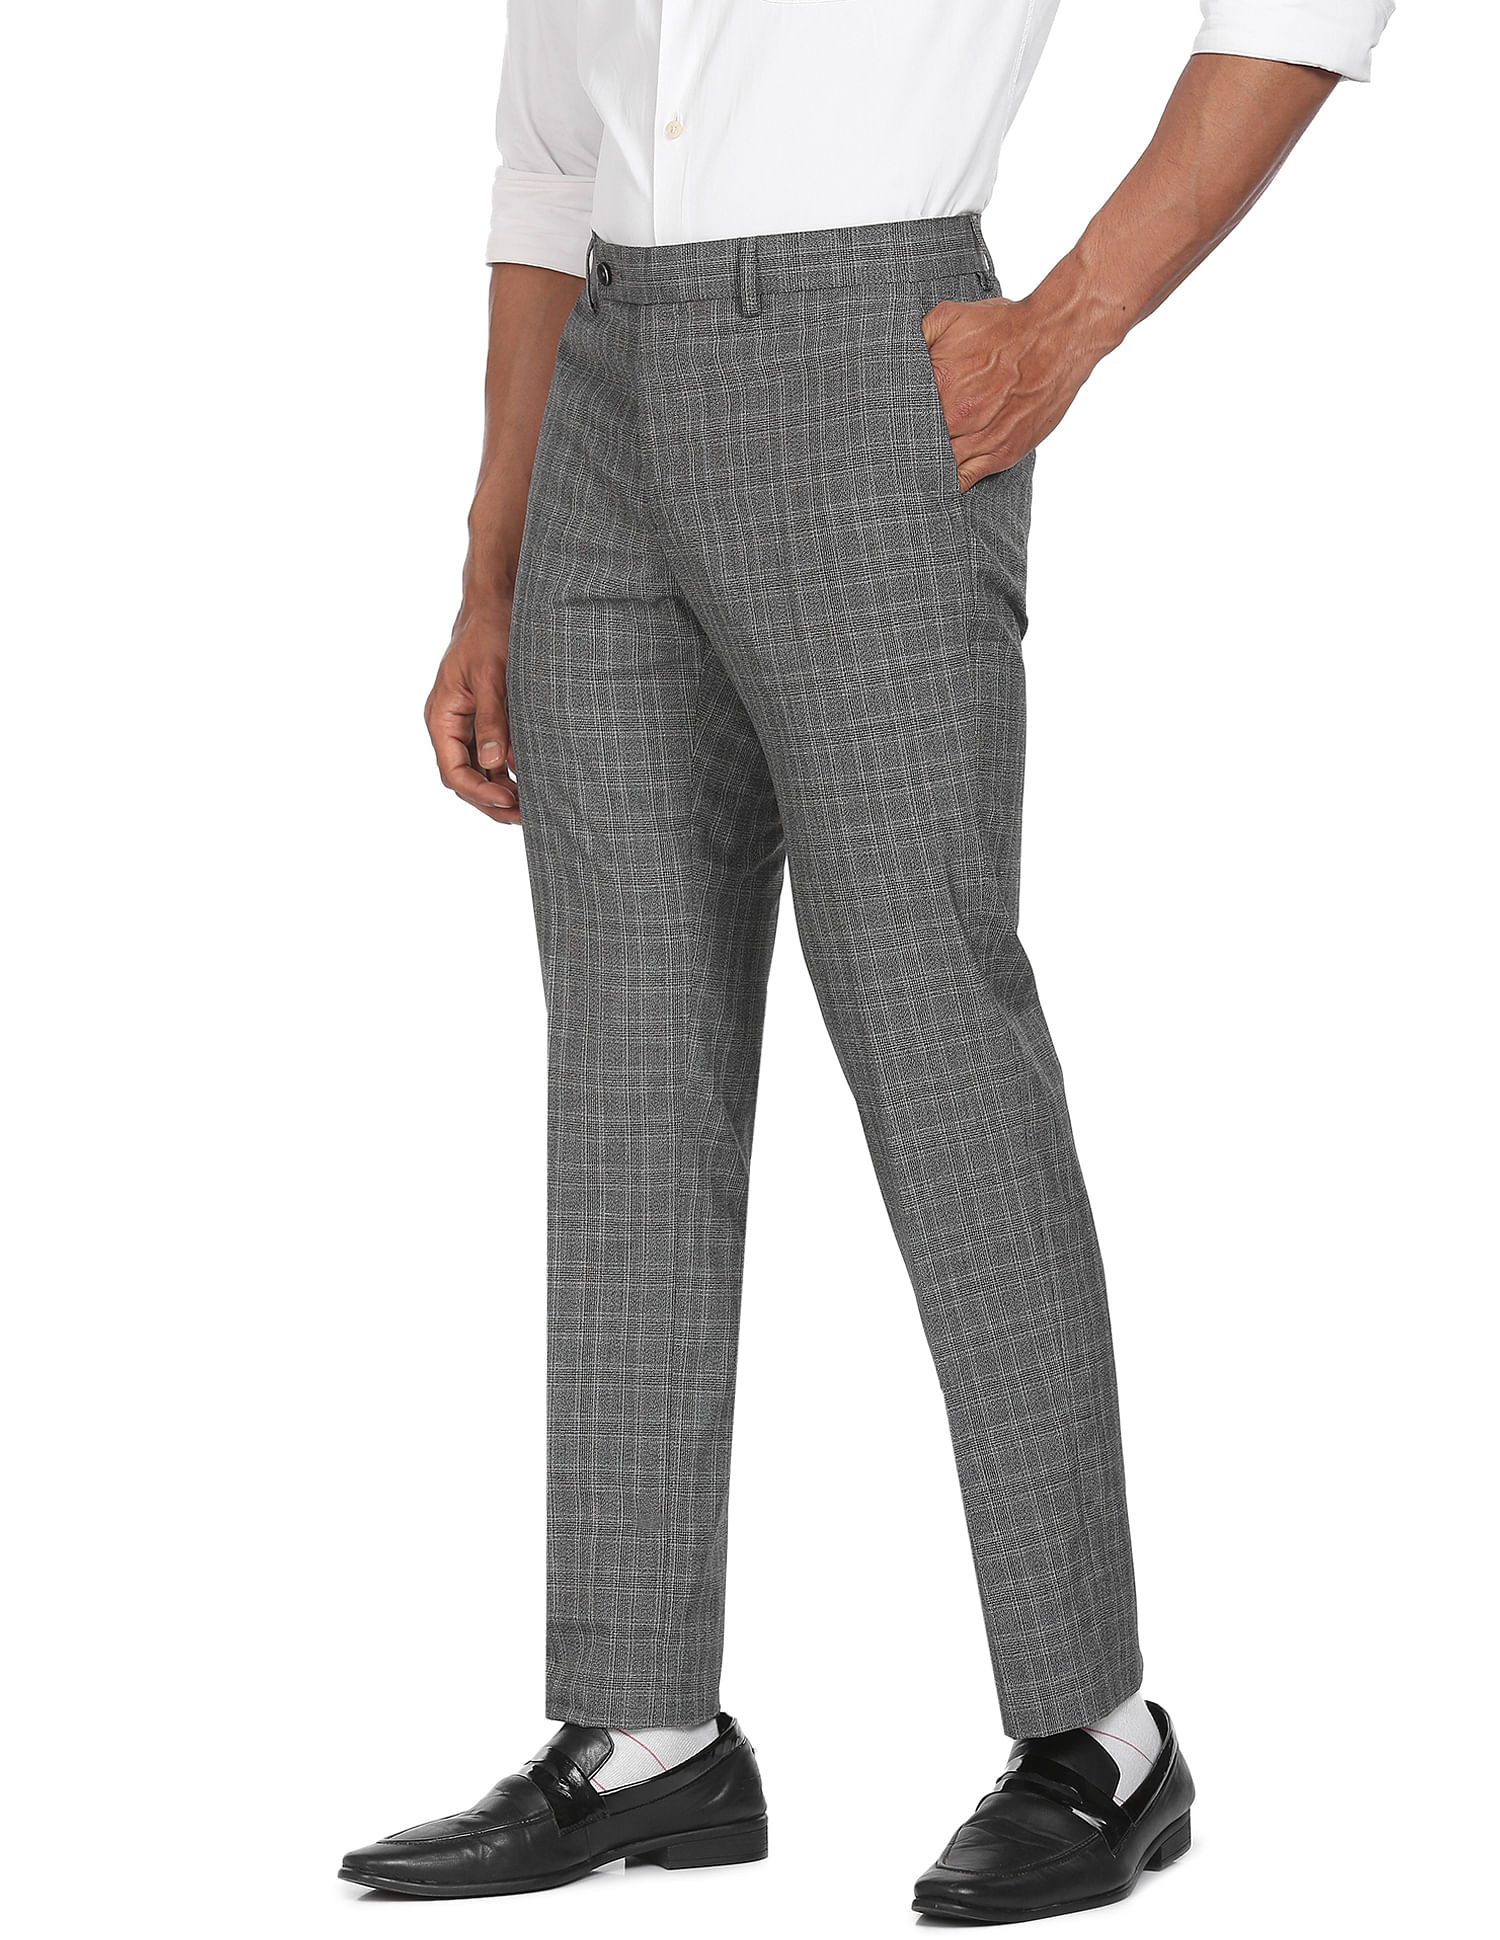 Father Sons - NEW Silver Check Formal Trousers | 100 Made 🔖 30% Off Site  Wide ⏱️ https://fathersonsclothing.com/collections/trousers /products/father-sons-slim-formal-large-silver-grey-check-stretch-trousers-fst005-pre-order-18th-december  Faster ...